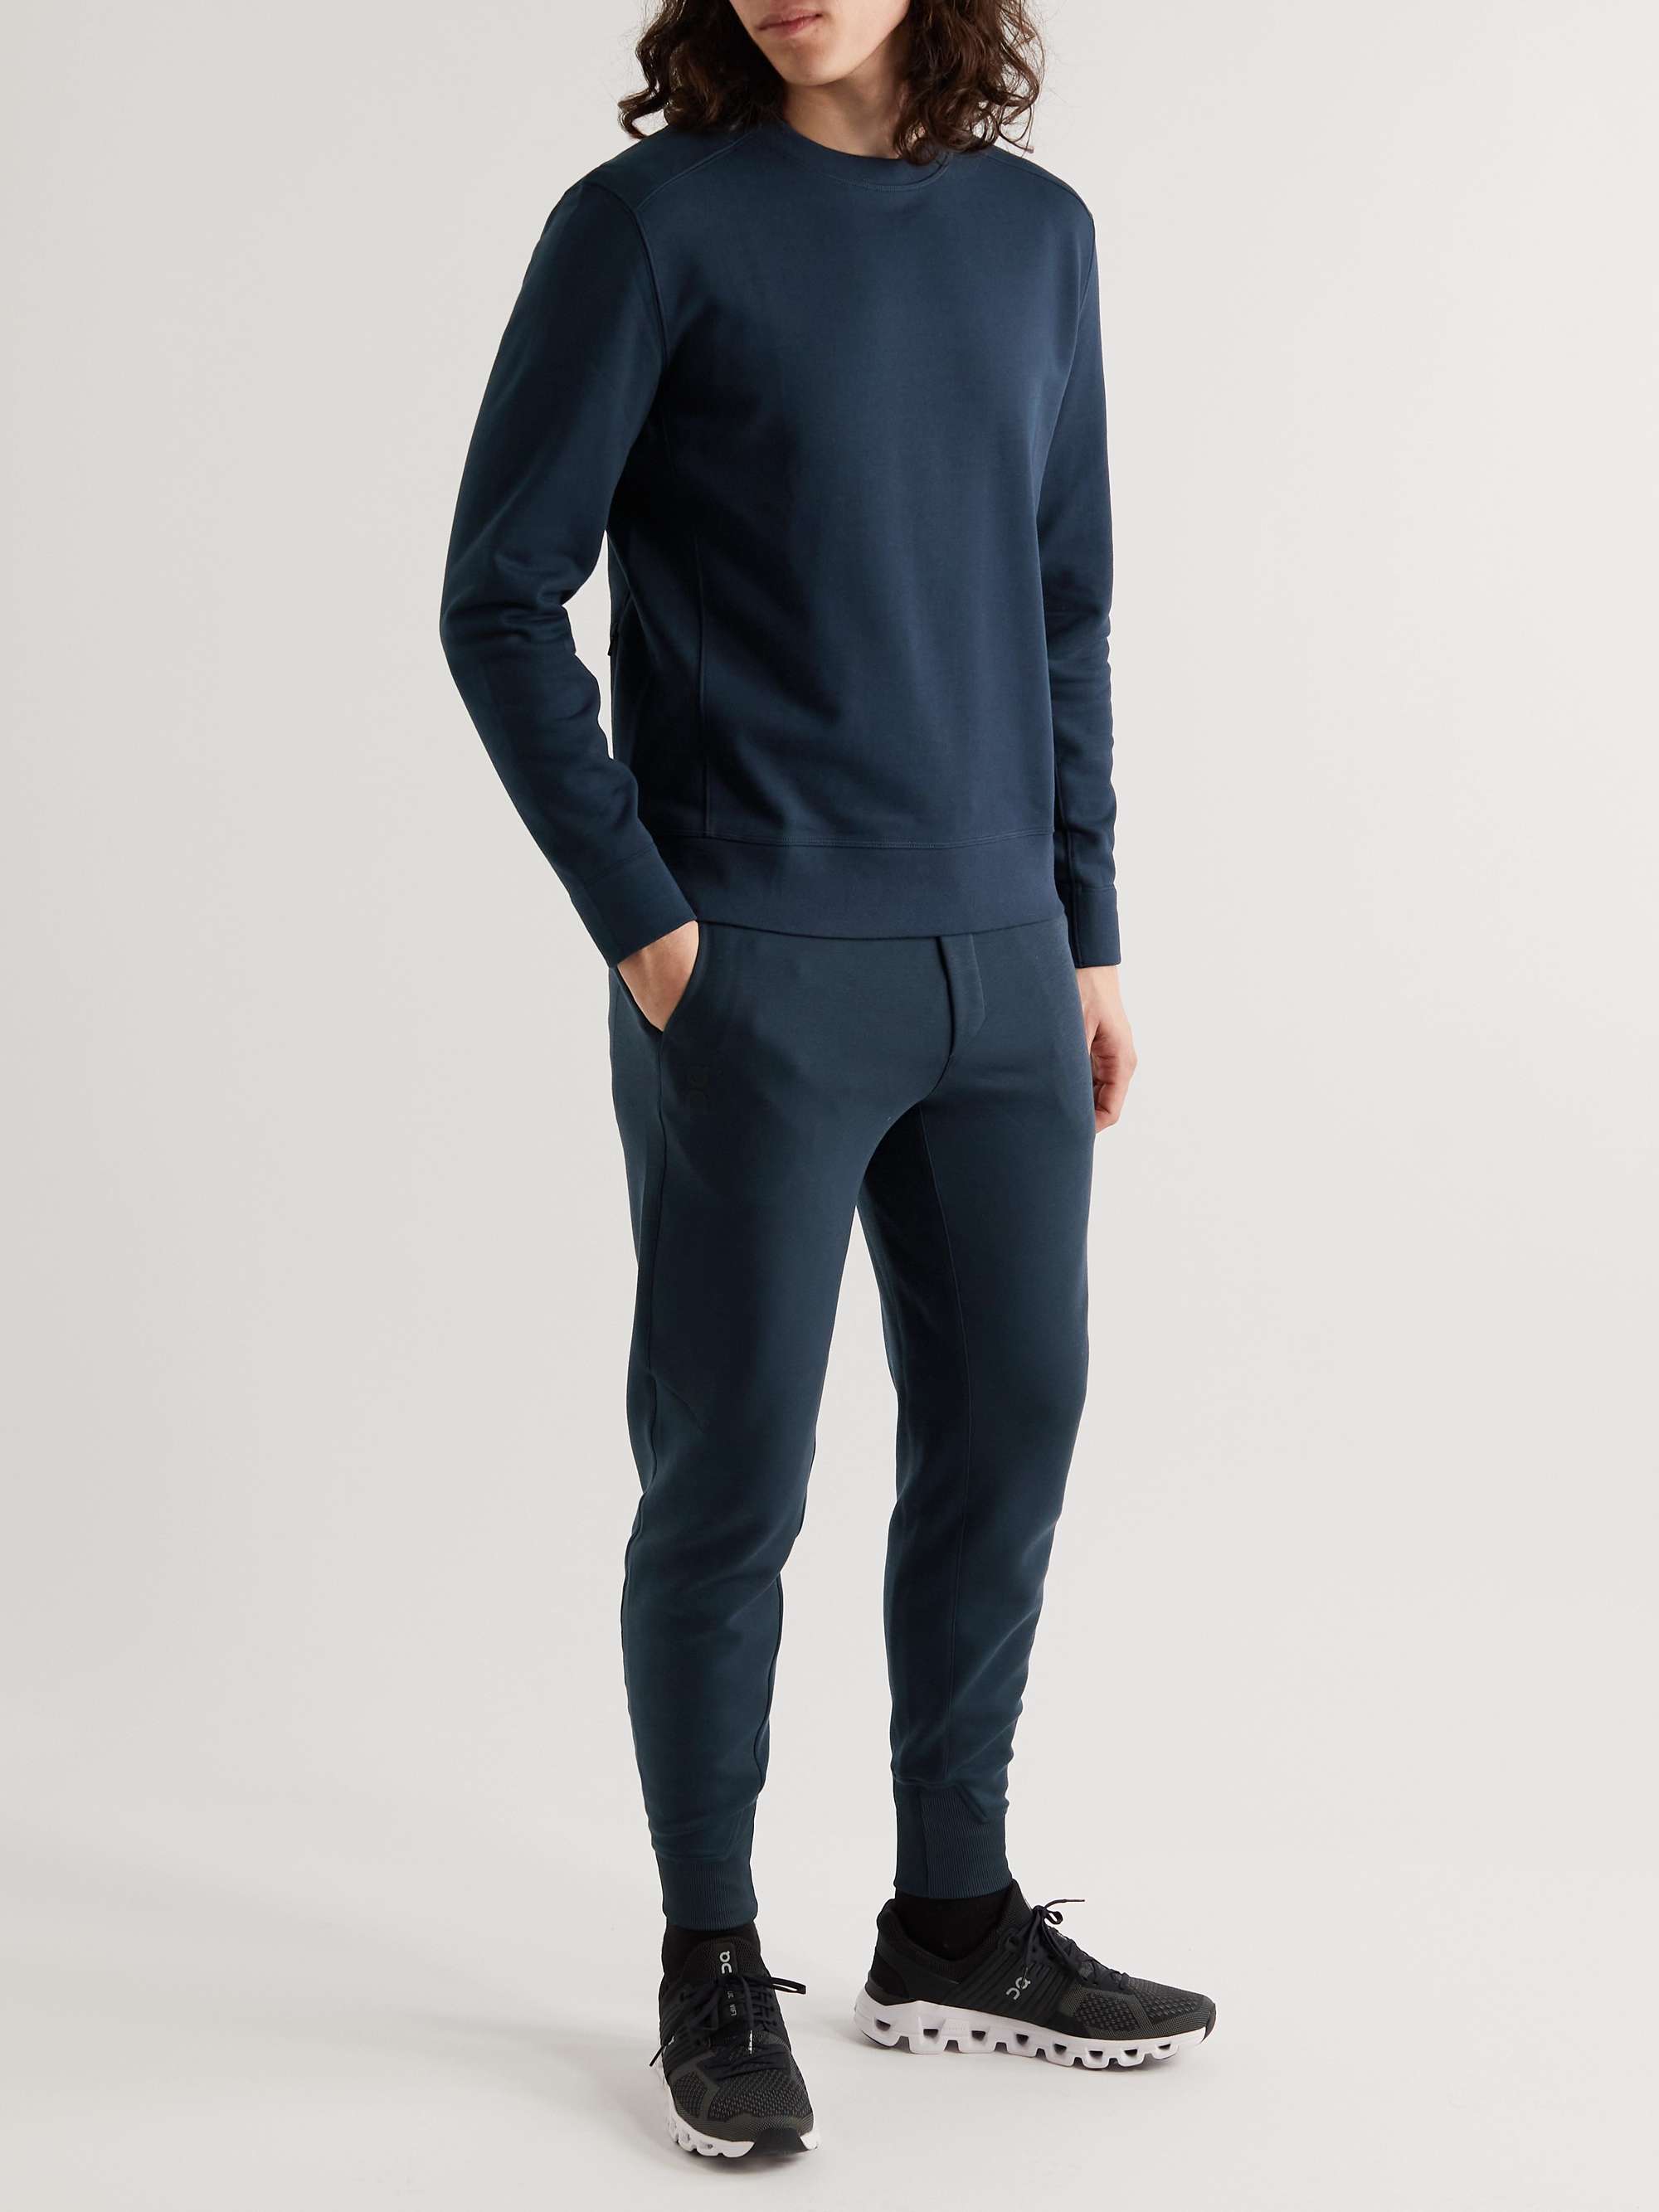 ON Slim-Fit Tapered Recycled Jersey Sweatpants